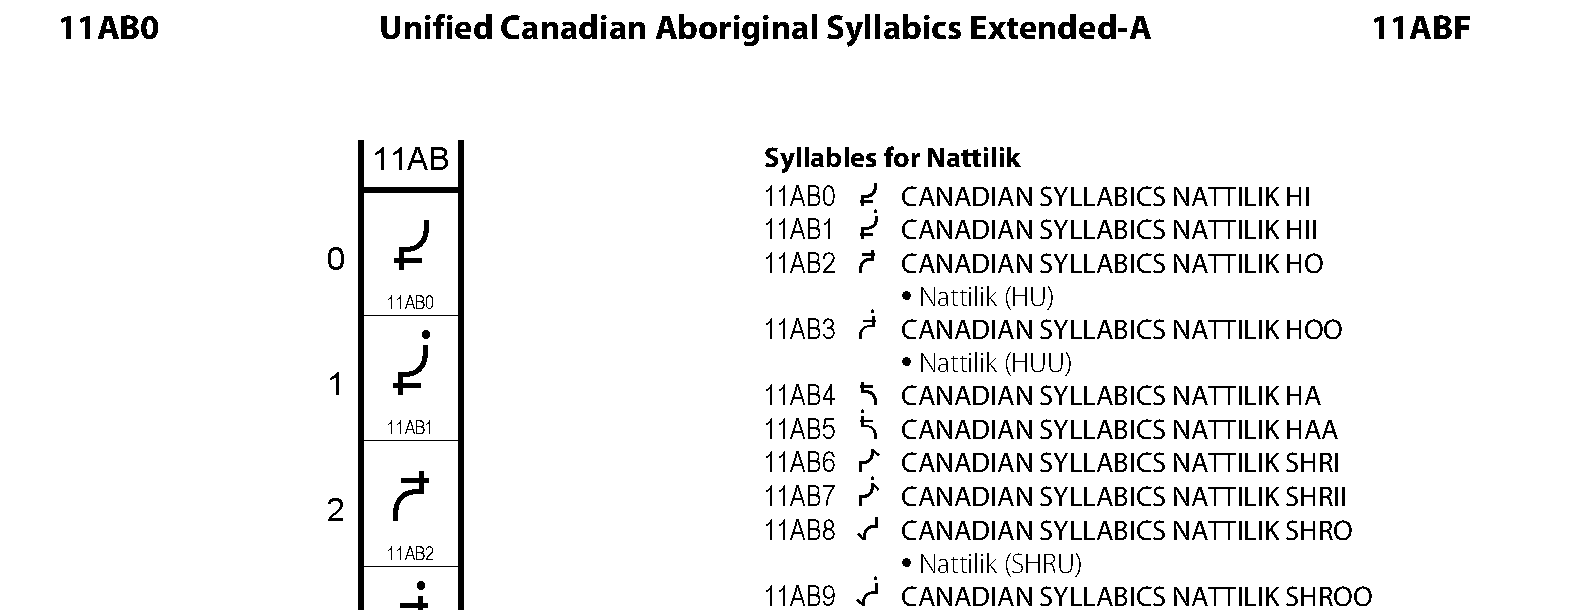 Unicode - Unified Canadian Aboriginal Syllabics Extended-A